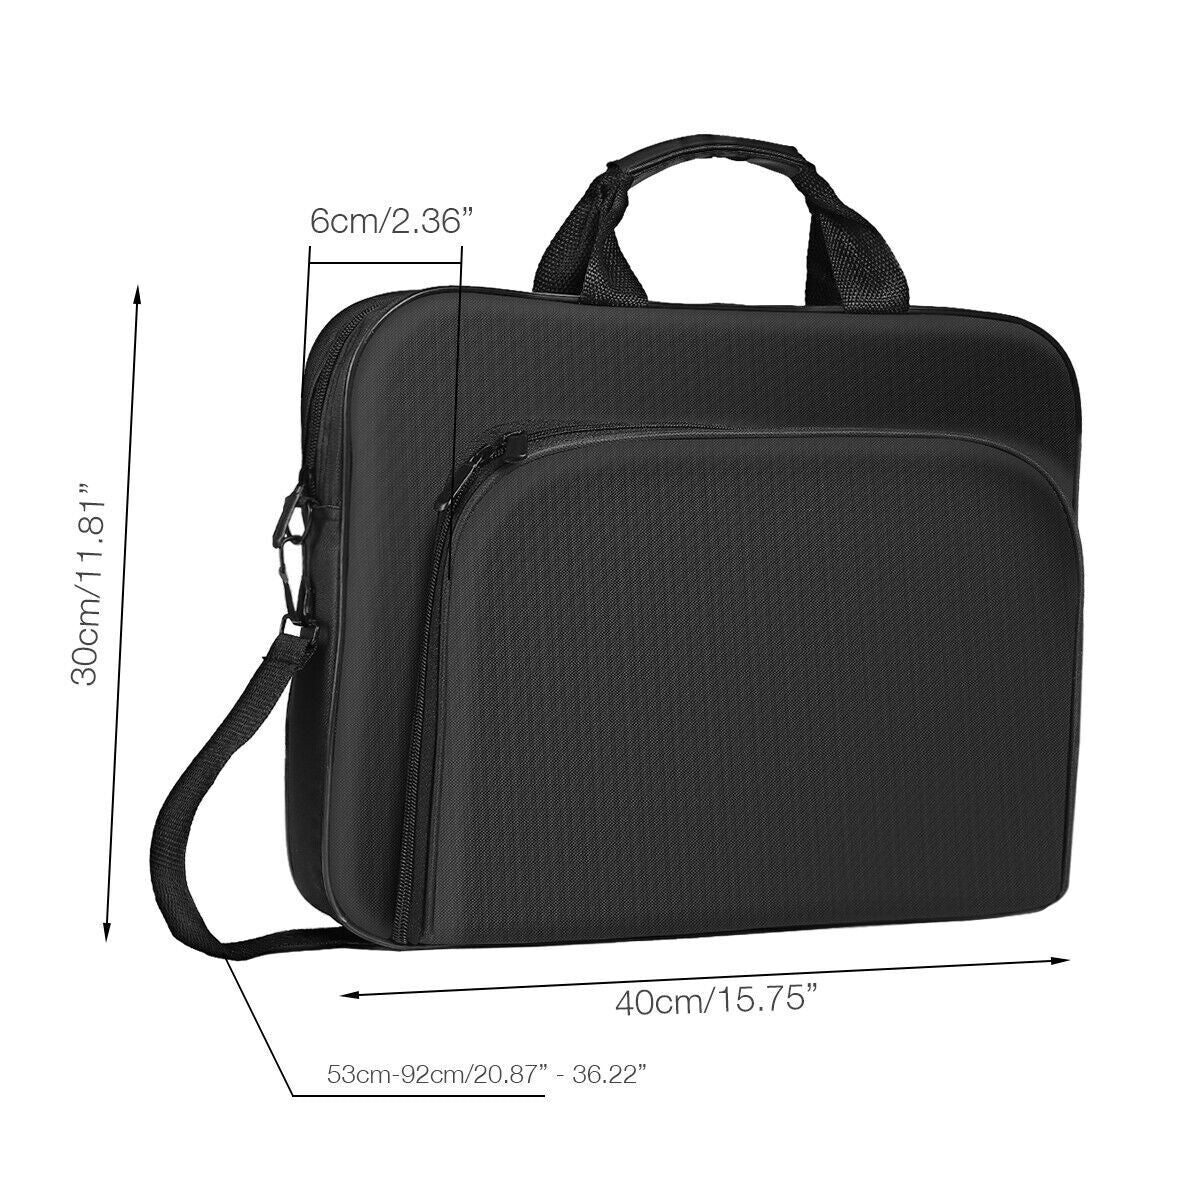 15.6 Inch Computer Bags Laptop PC Shoulder Bag Carrying Soft Notebook Case Cover